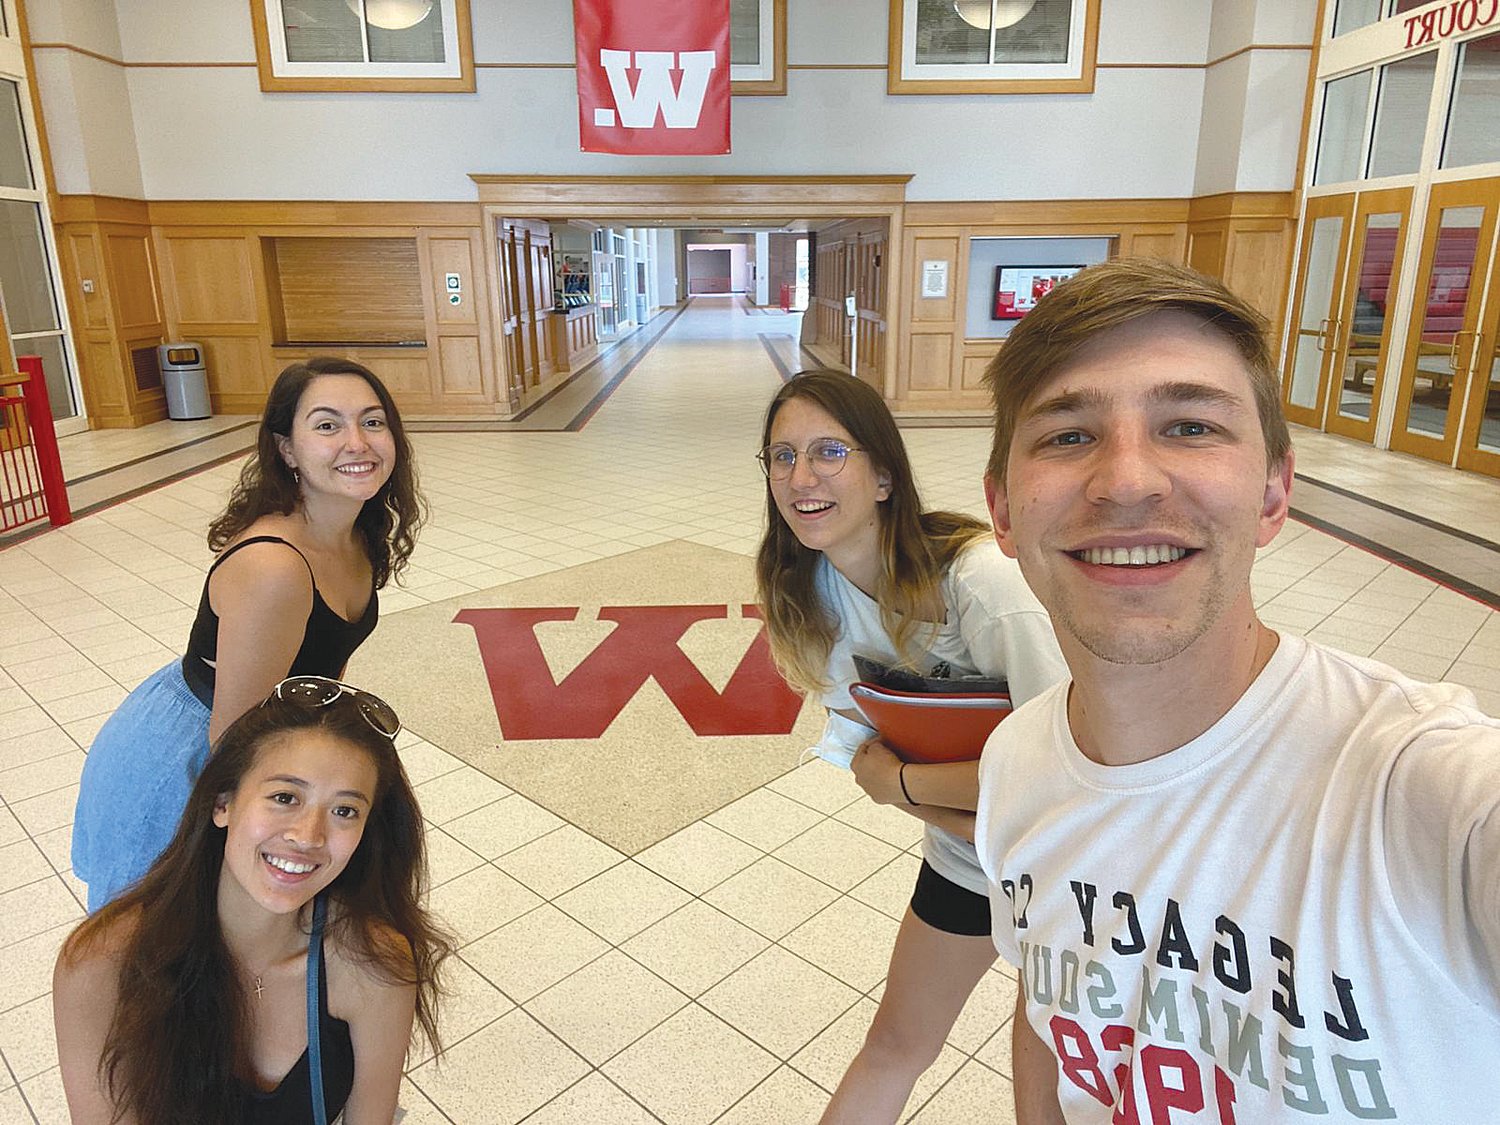 Wabash College has welcomed four Foreign Language Teaching Assistants from Argentina, France, Spain and Taiwan. The Fulbright FLTA program gives young English teachers from foreign countries a chance to teach their native language at a higher education institution in the U.S.